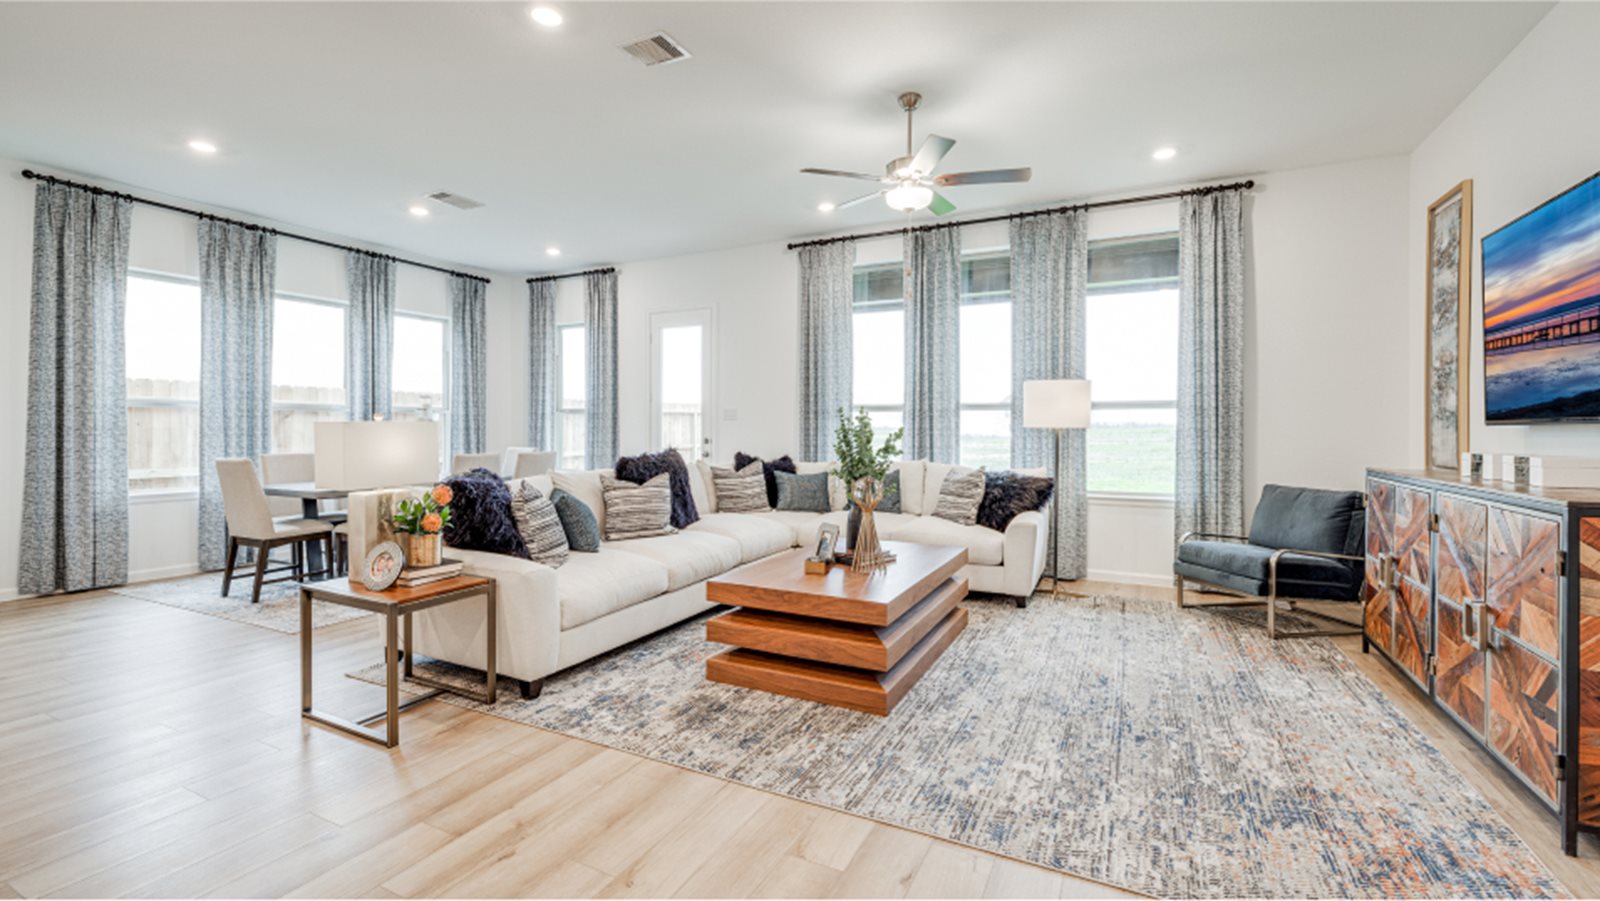 Photo of the living room inside the Cabot model home by Lennar Homes in Harvest Green in Richmond, Texas.